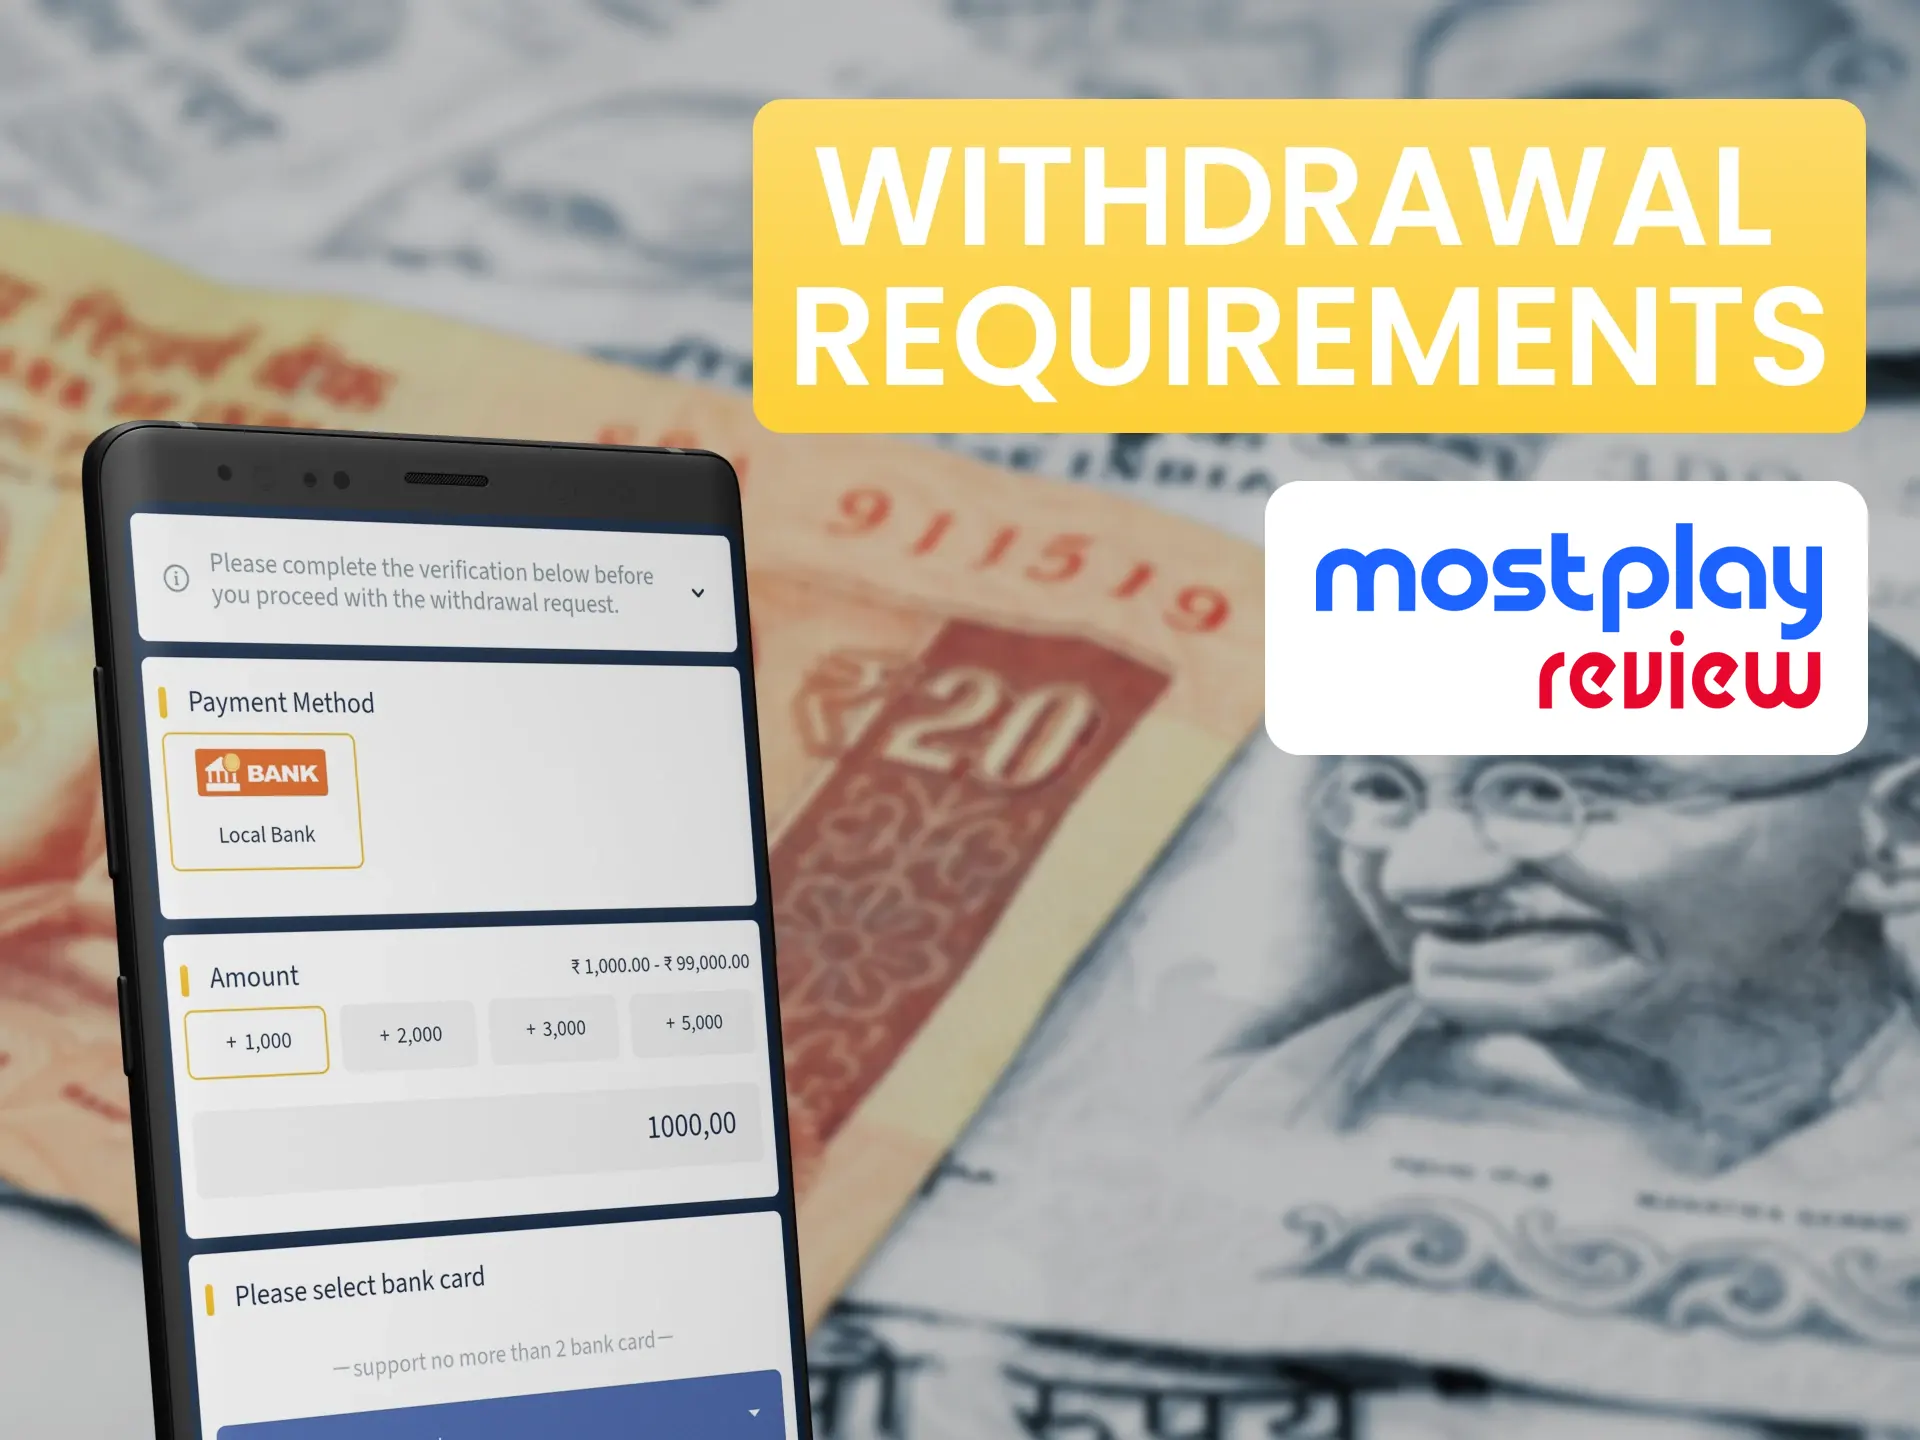 Withdraw money without problems at Mostplay.